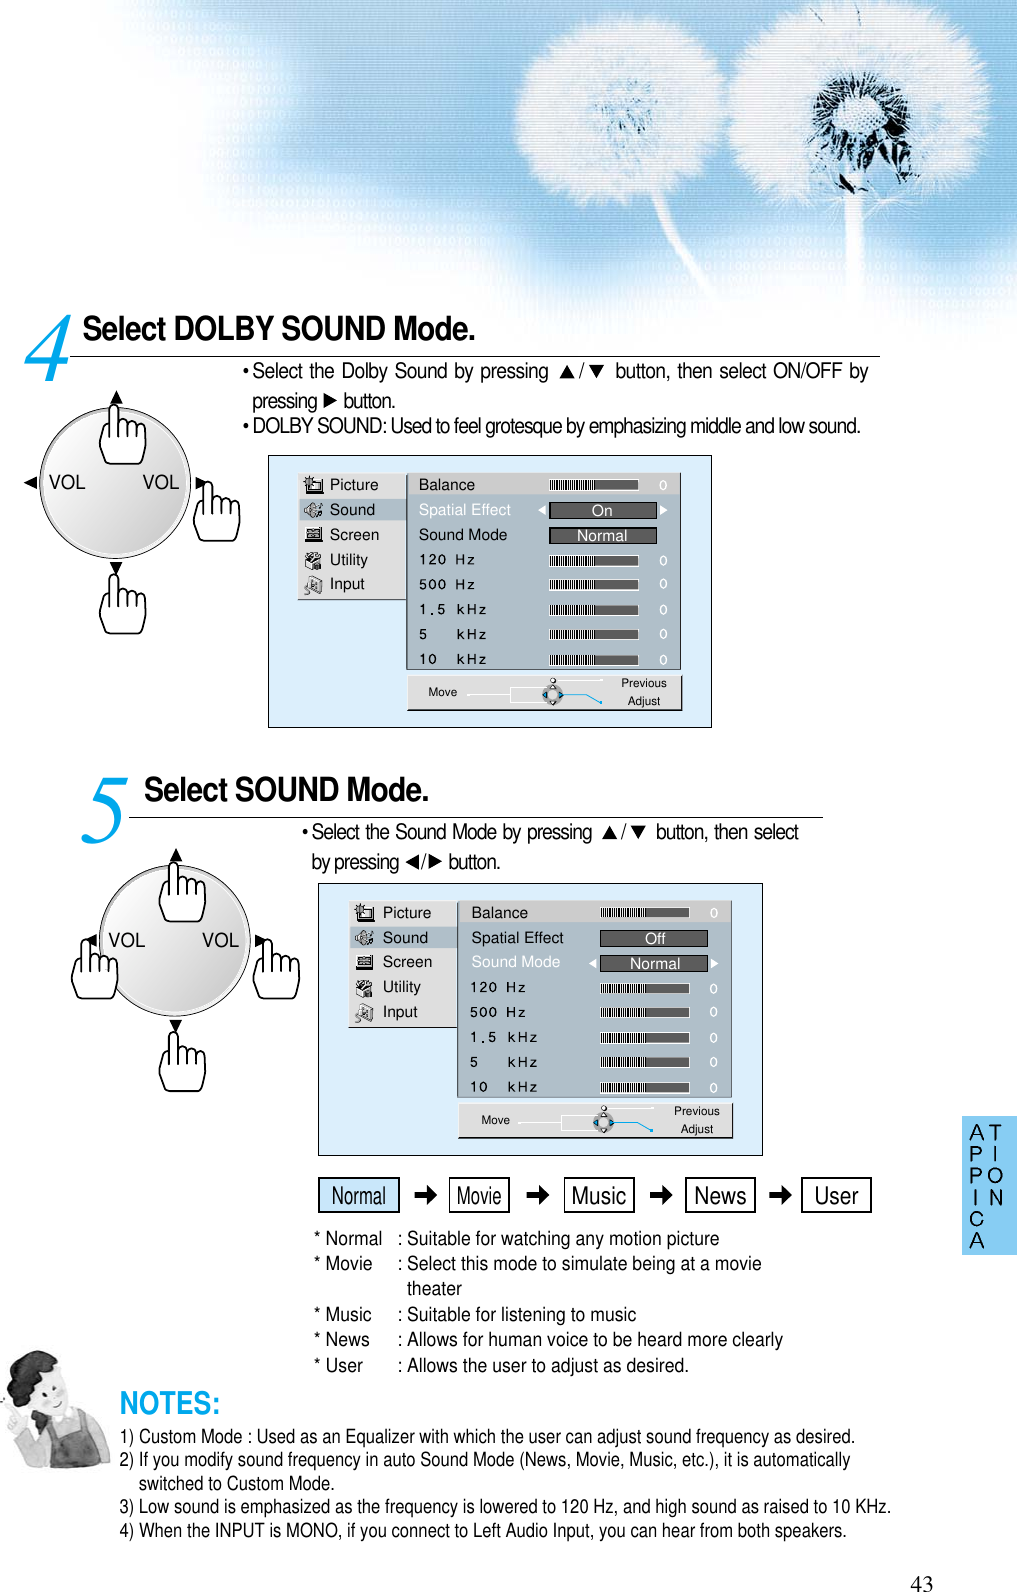 Select DOLBY SOUND Mode.• Select the Dolby Sound by pressing  / button, then select ON/OFF bypressing button.• DOLBY SOUND: Used to feel grotesque by emphasizing middle and low sound.Select SOUND Mode. 45PictureSoundScreenUtilityInputBalanceSpatial EffectSound ModeOnNormalMove PreviousAdjustPictureSoundScreenUtilityInputBalanceSpatial EffectSound ModeOffNormalMove PreviousAdjust43• Select the Sound Mode by pressing  / button, then selectby pressing  / button. * Normal  : Suitable for watching any motion picture * Movie  : Select this mode to simulate being at a movietheater* Music  : Suitable for listening to music * News  : Allows for human voice to be heard more clearly* User  : Allows the user to adjust as desired. NOTES:1) Custom Mode : Used as an Equalizer with which the user can adjust sound frequency as desired.2) If you modify sound frequency in auto Sound Mode (News, Movie, Music, etc.), it is automaticallyswitched to Custom Mode.3) Low sound is emphasized as the frequency is lowered to 120 Hz, and high sound as raised to 10 KHz. 4) When the INPUT is MONO, if you connect to Left Audio Input, you can hear from both speakers. VOLVOLVOLVOLNormal MovieMusic UserNews